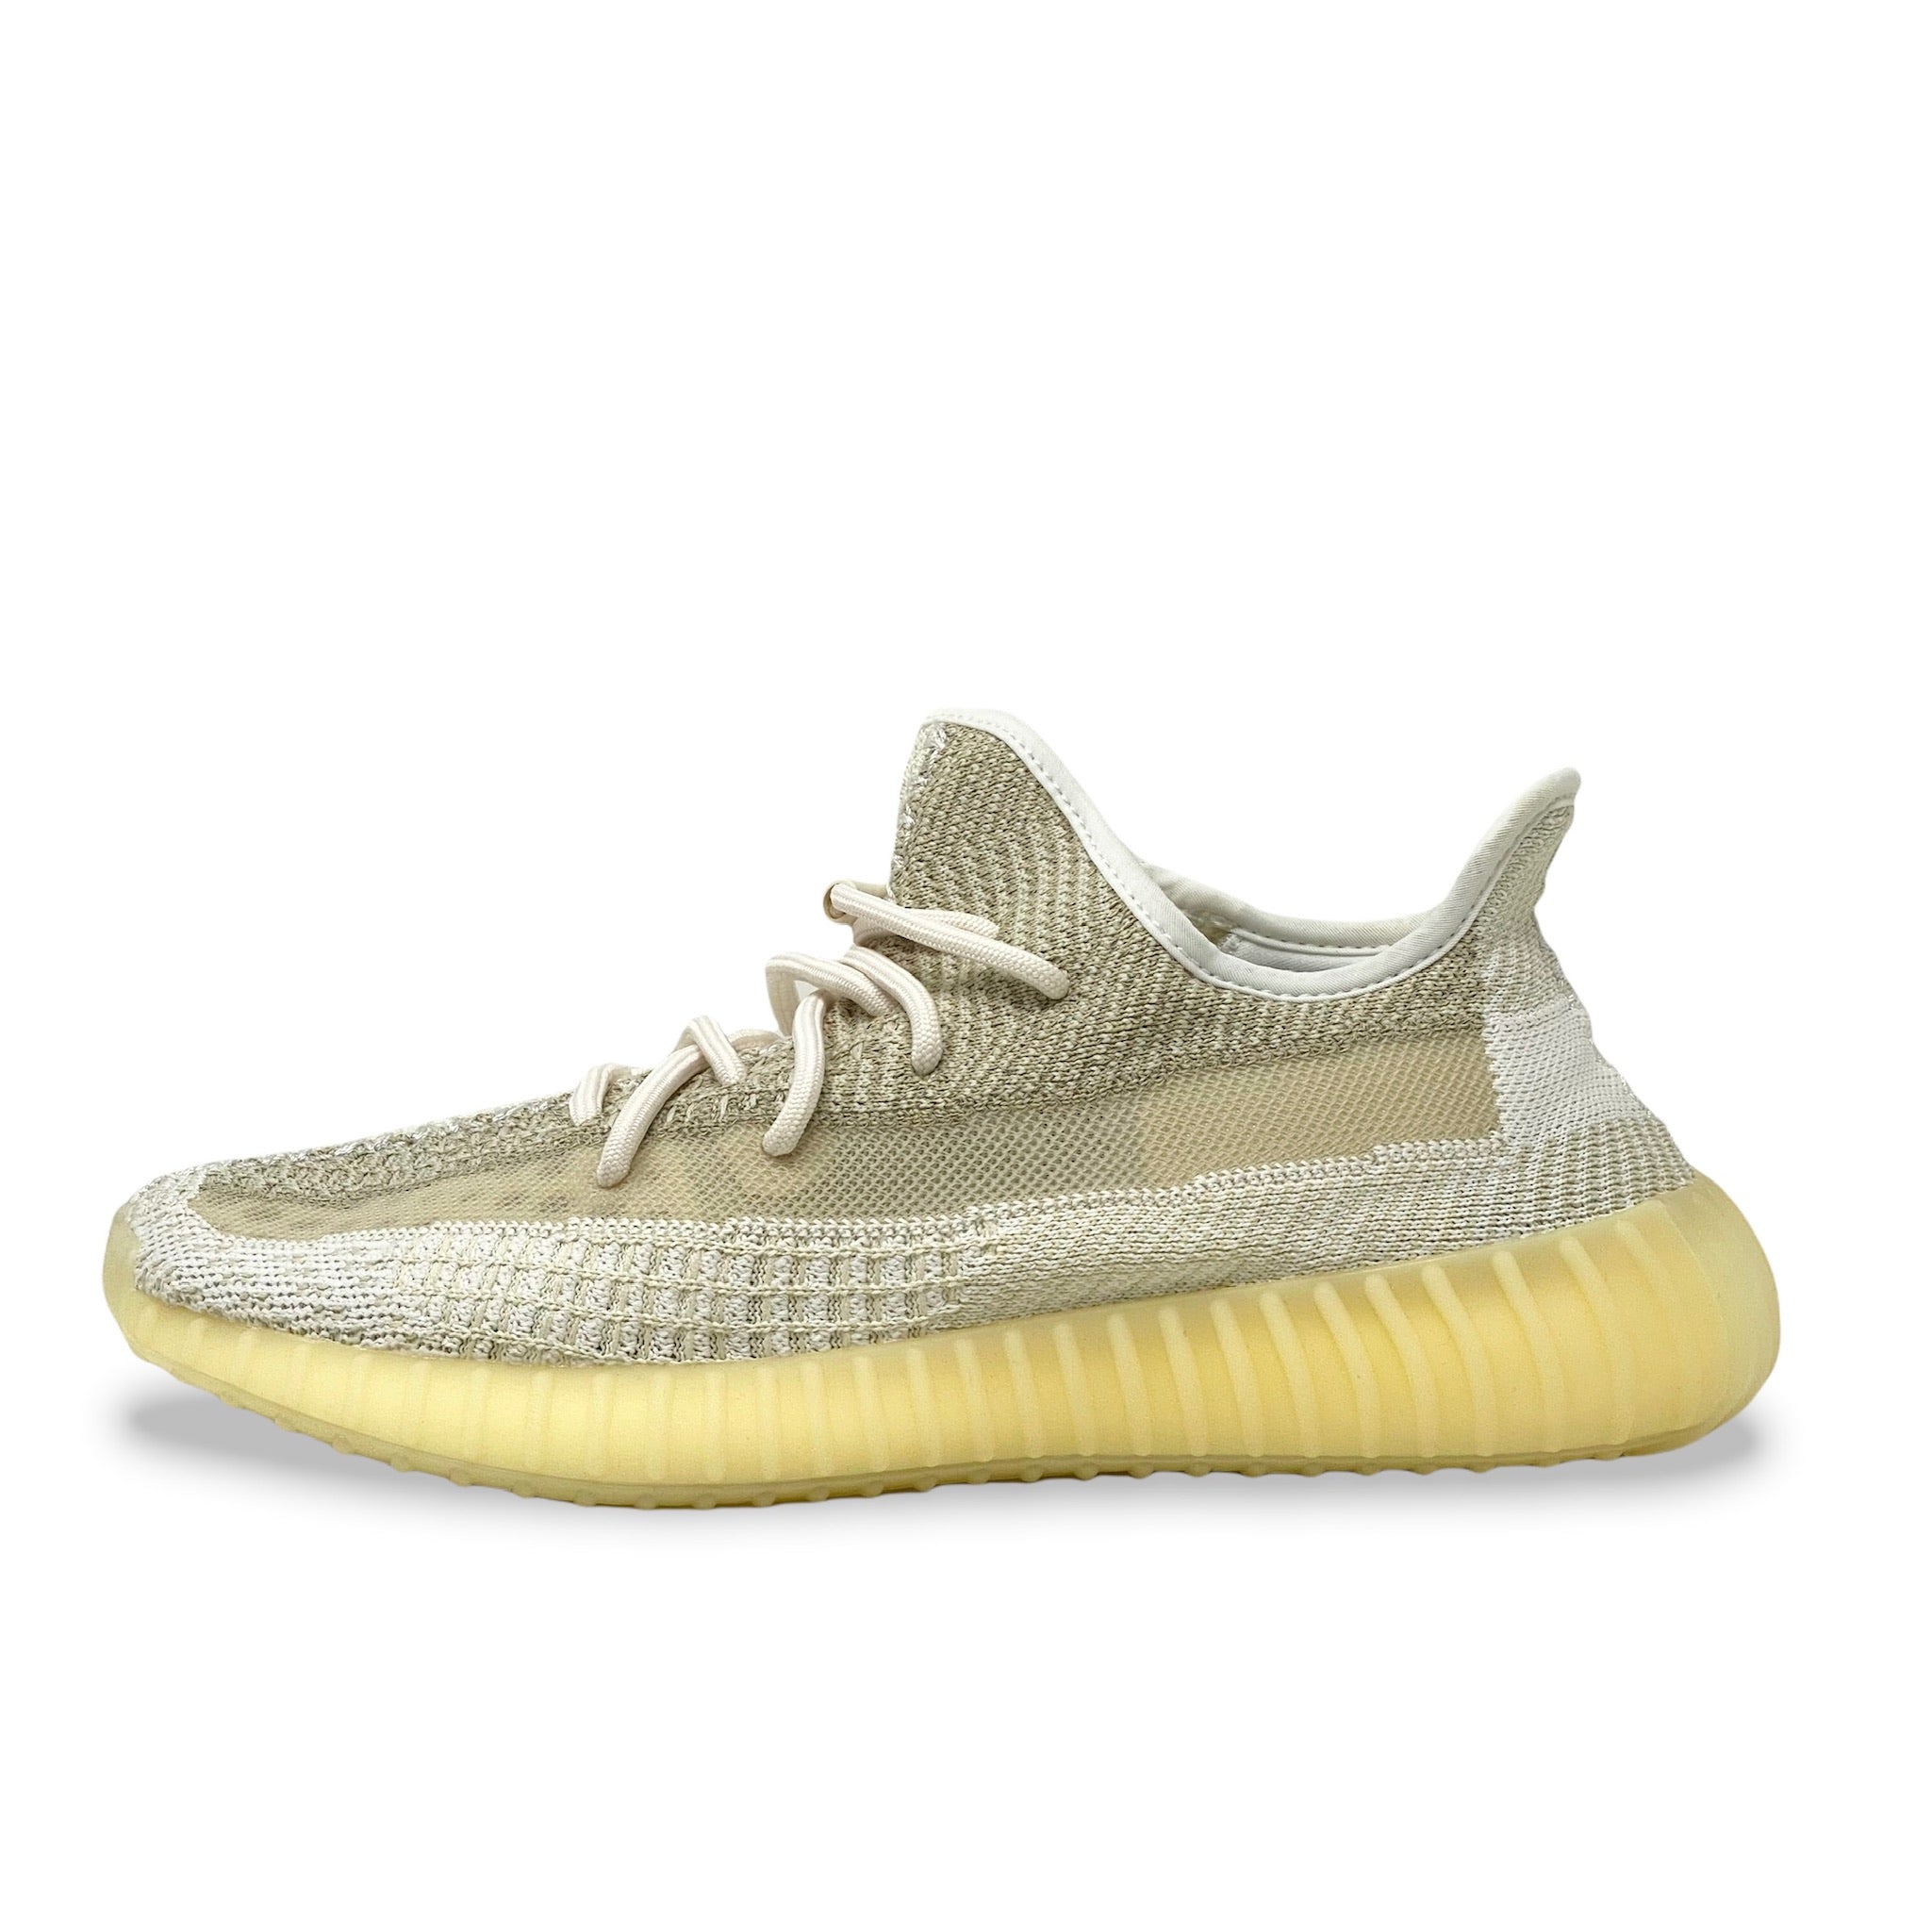 Yeezy Boost 350 V2 Natural Sneakers 9.5